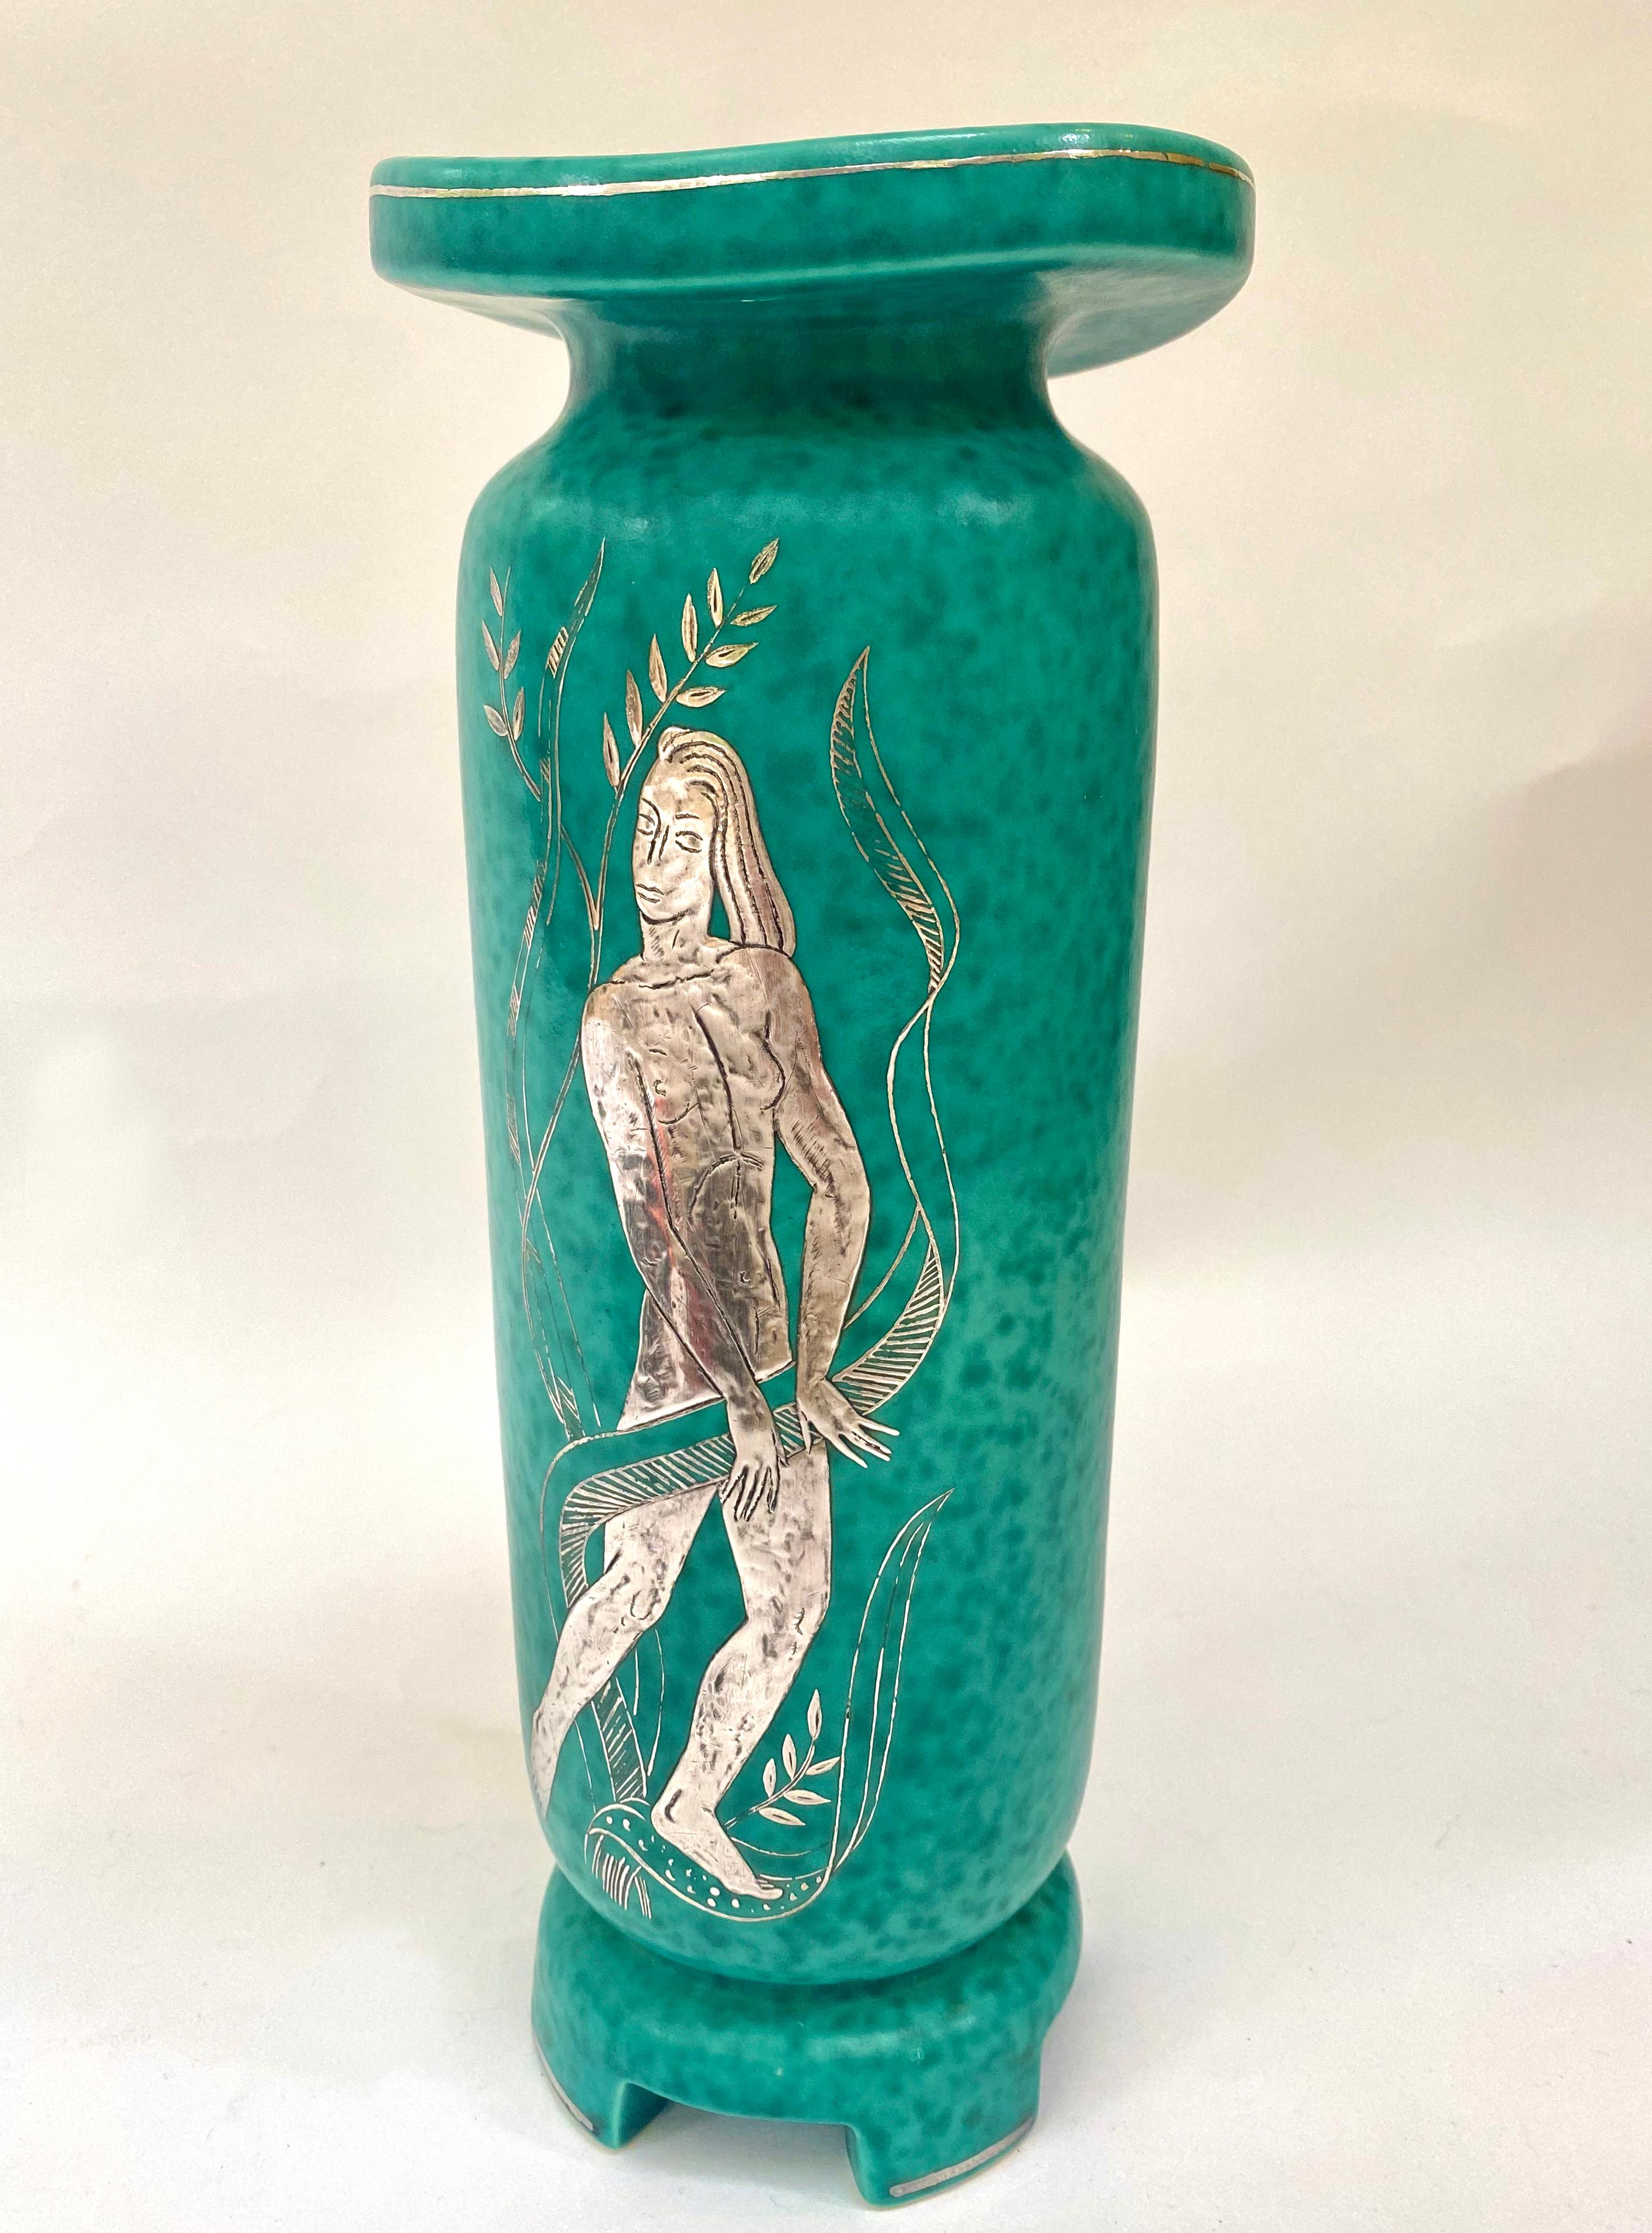 Incredible and large 1930s Wilhem Kage (1889-1960) Argenta Vase by Gustavsberg which is double sided. The top is a cool optical illusion of both round and slightly rectangular. Beautiful Siren in the underwater foliage with a rare base. Signed.